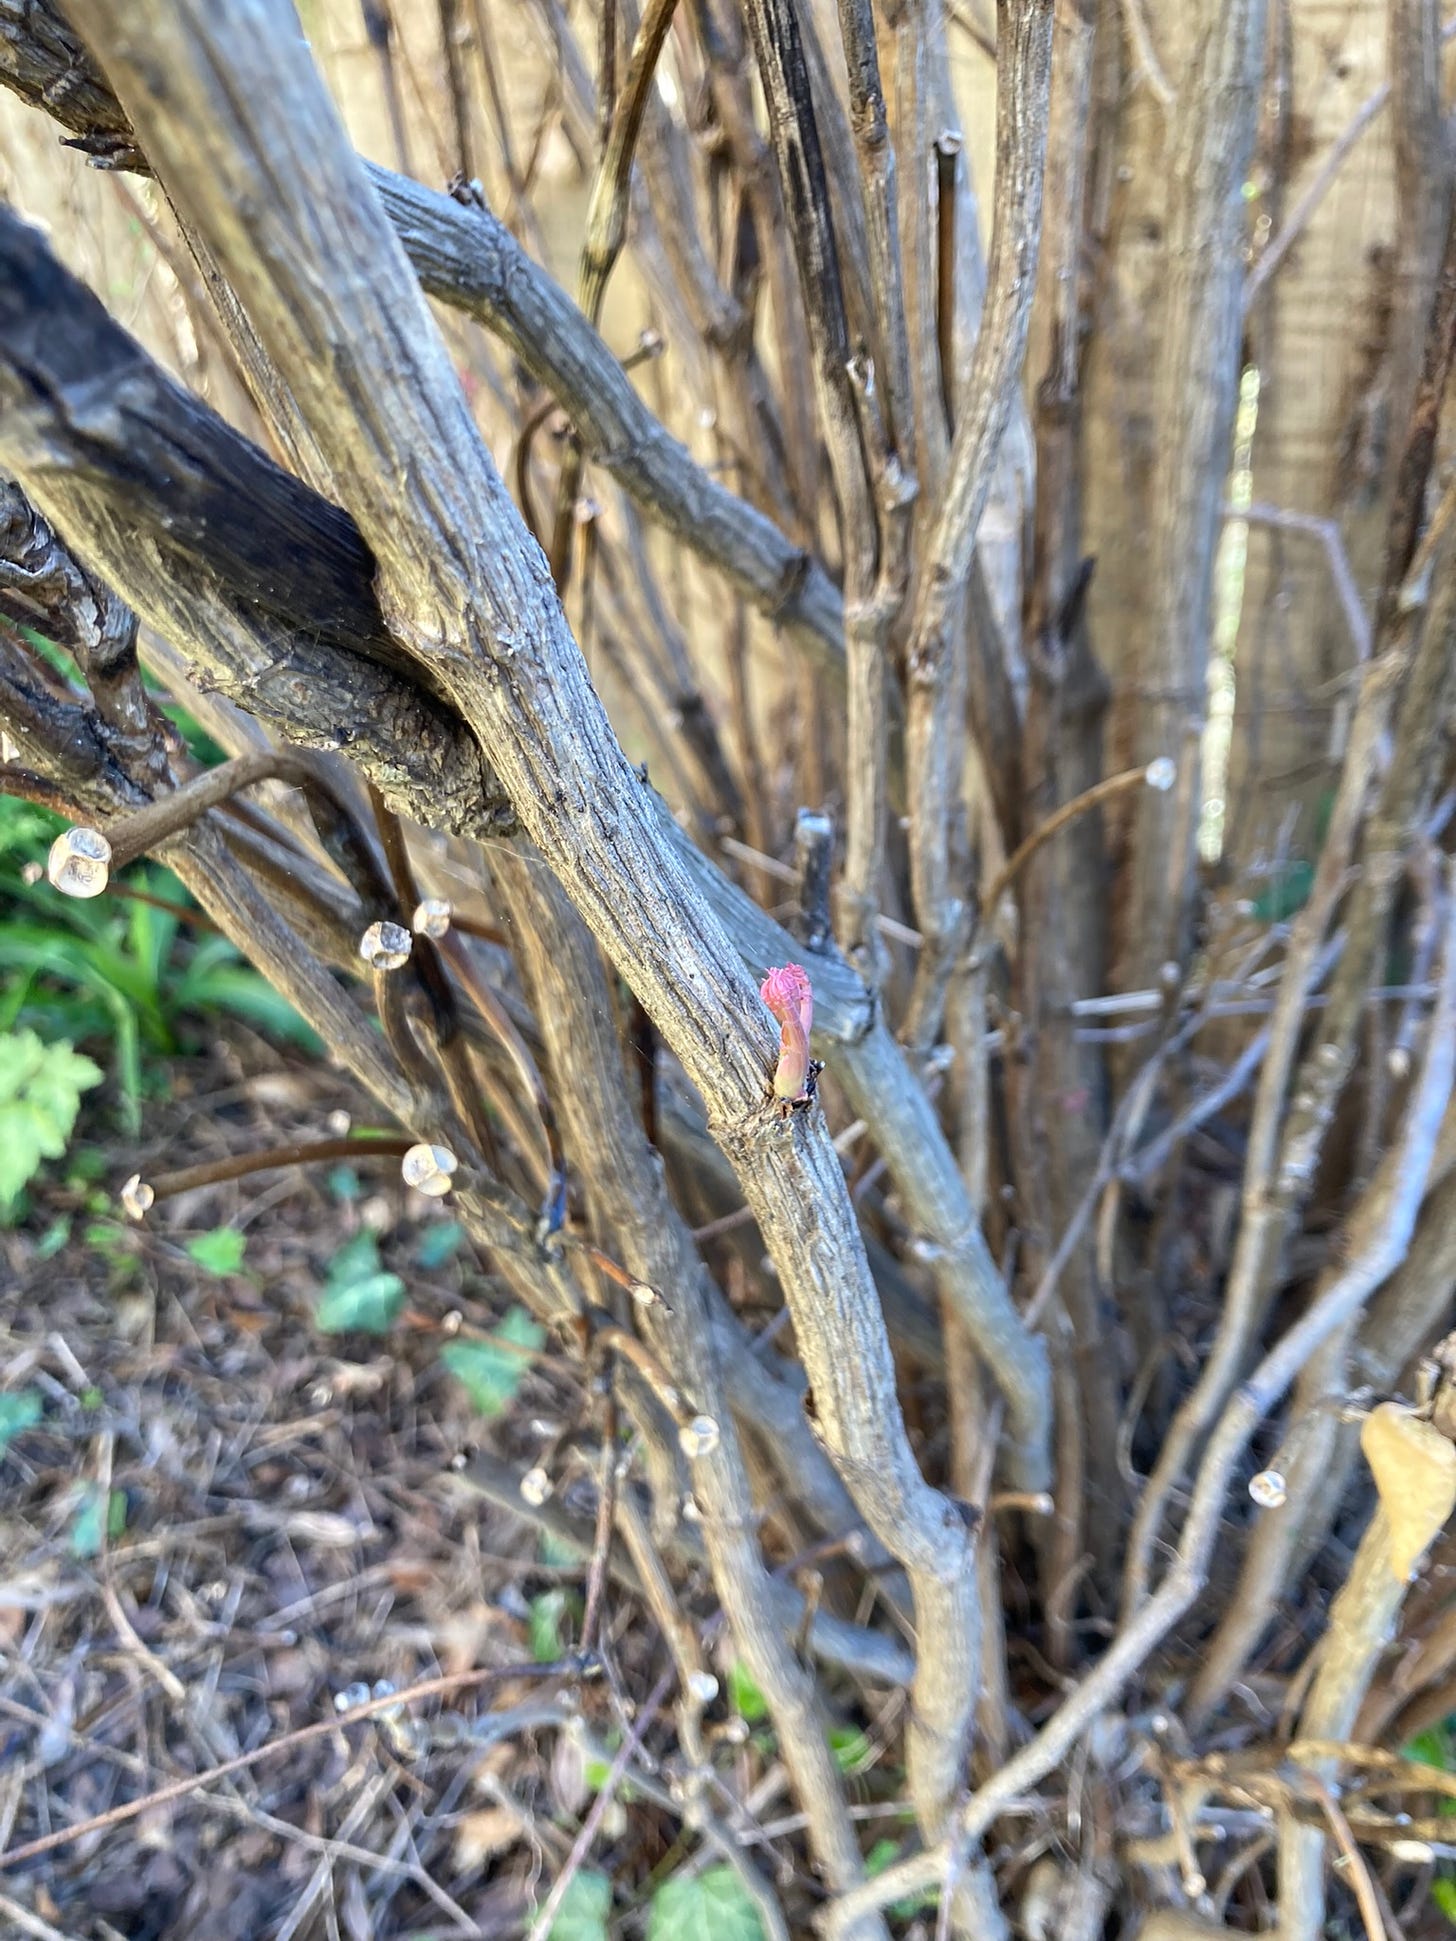 A tiny pink, beginning of a bud on an otherwise dead-looking burning bush